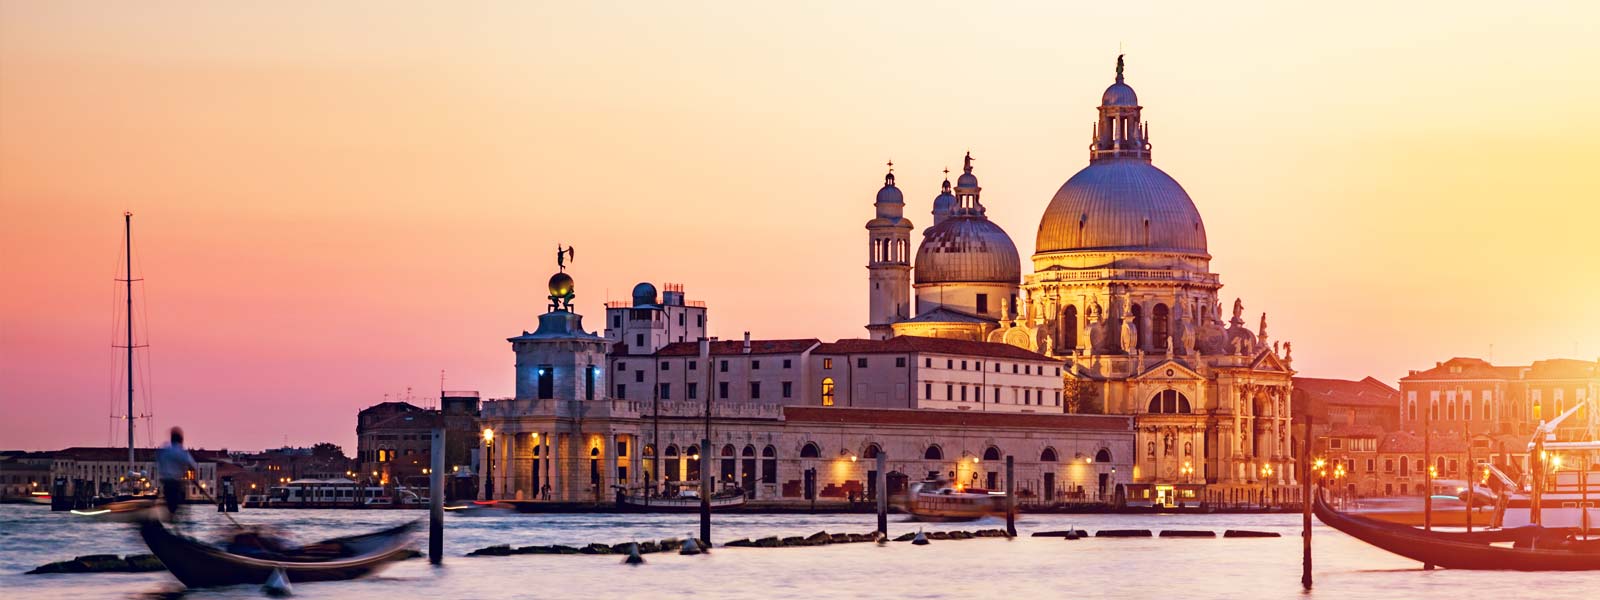 Wonderful view of Venice at sunset